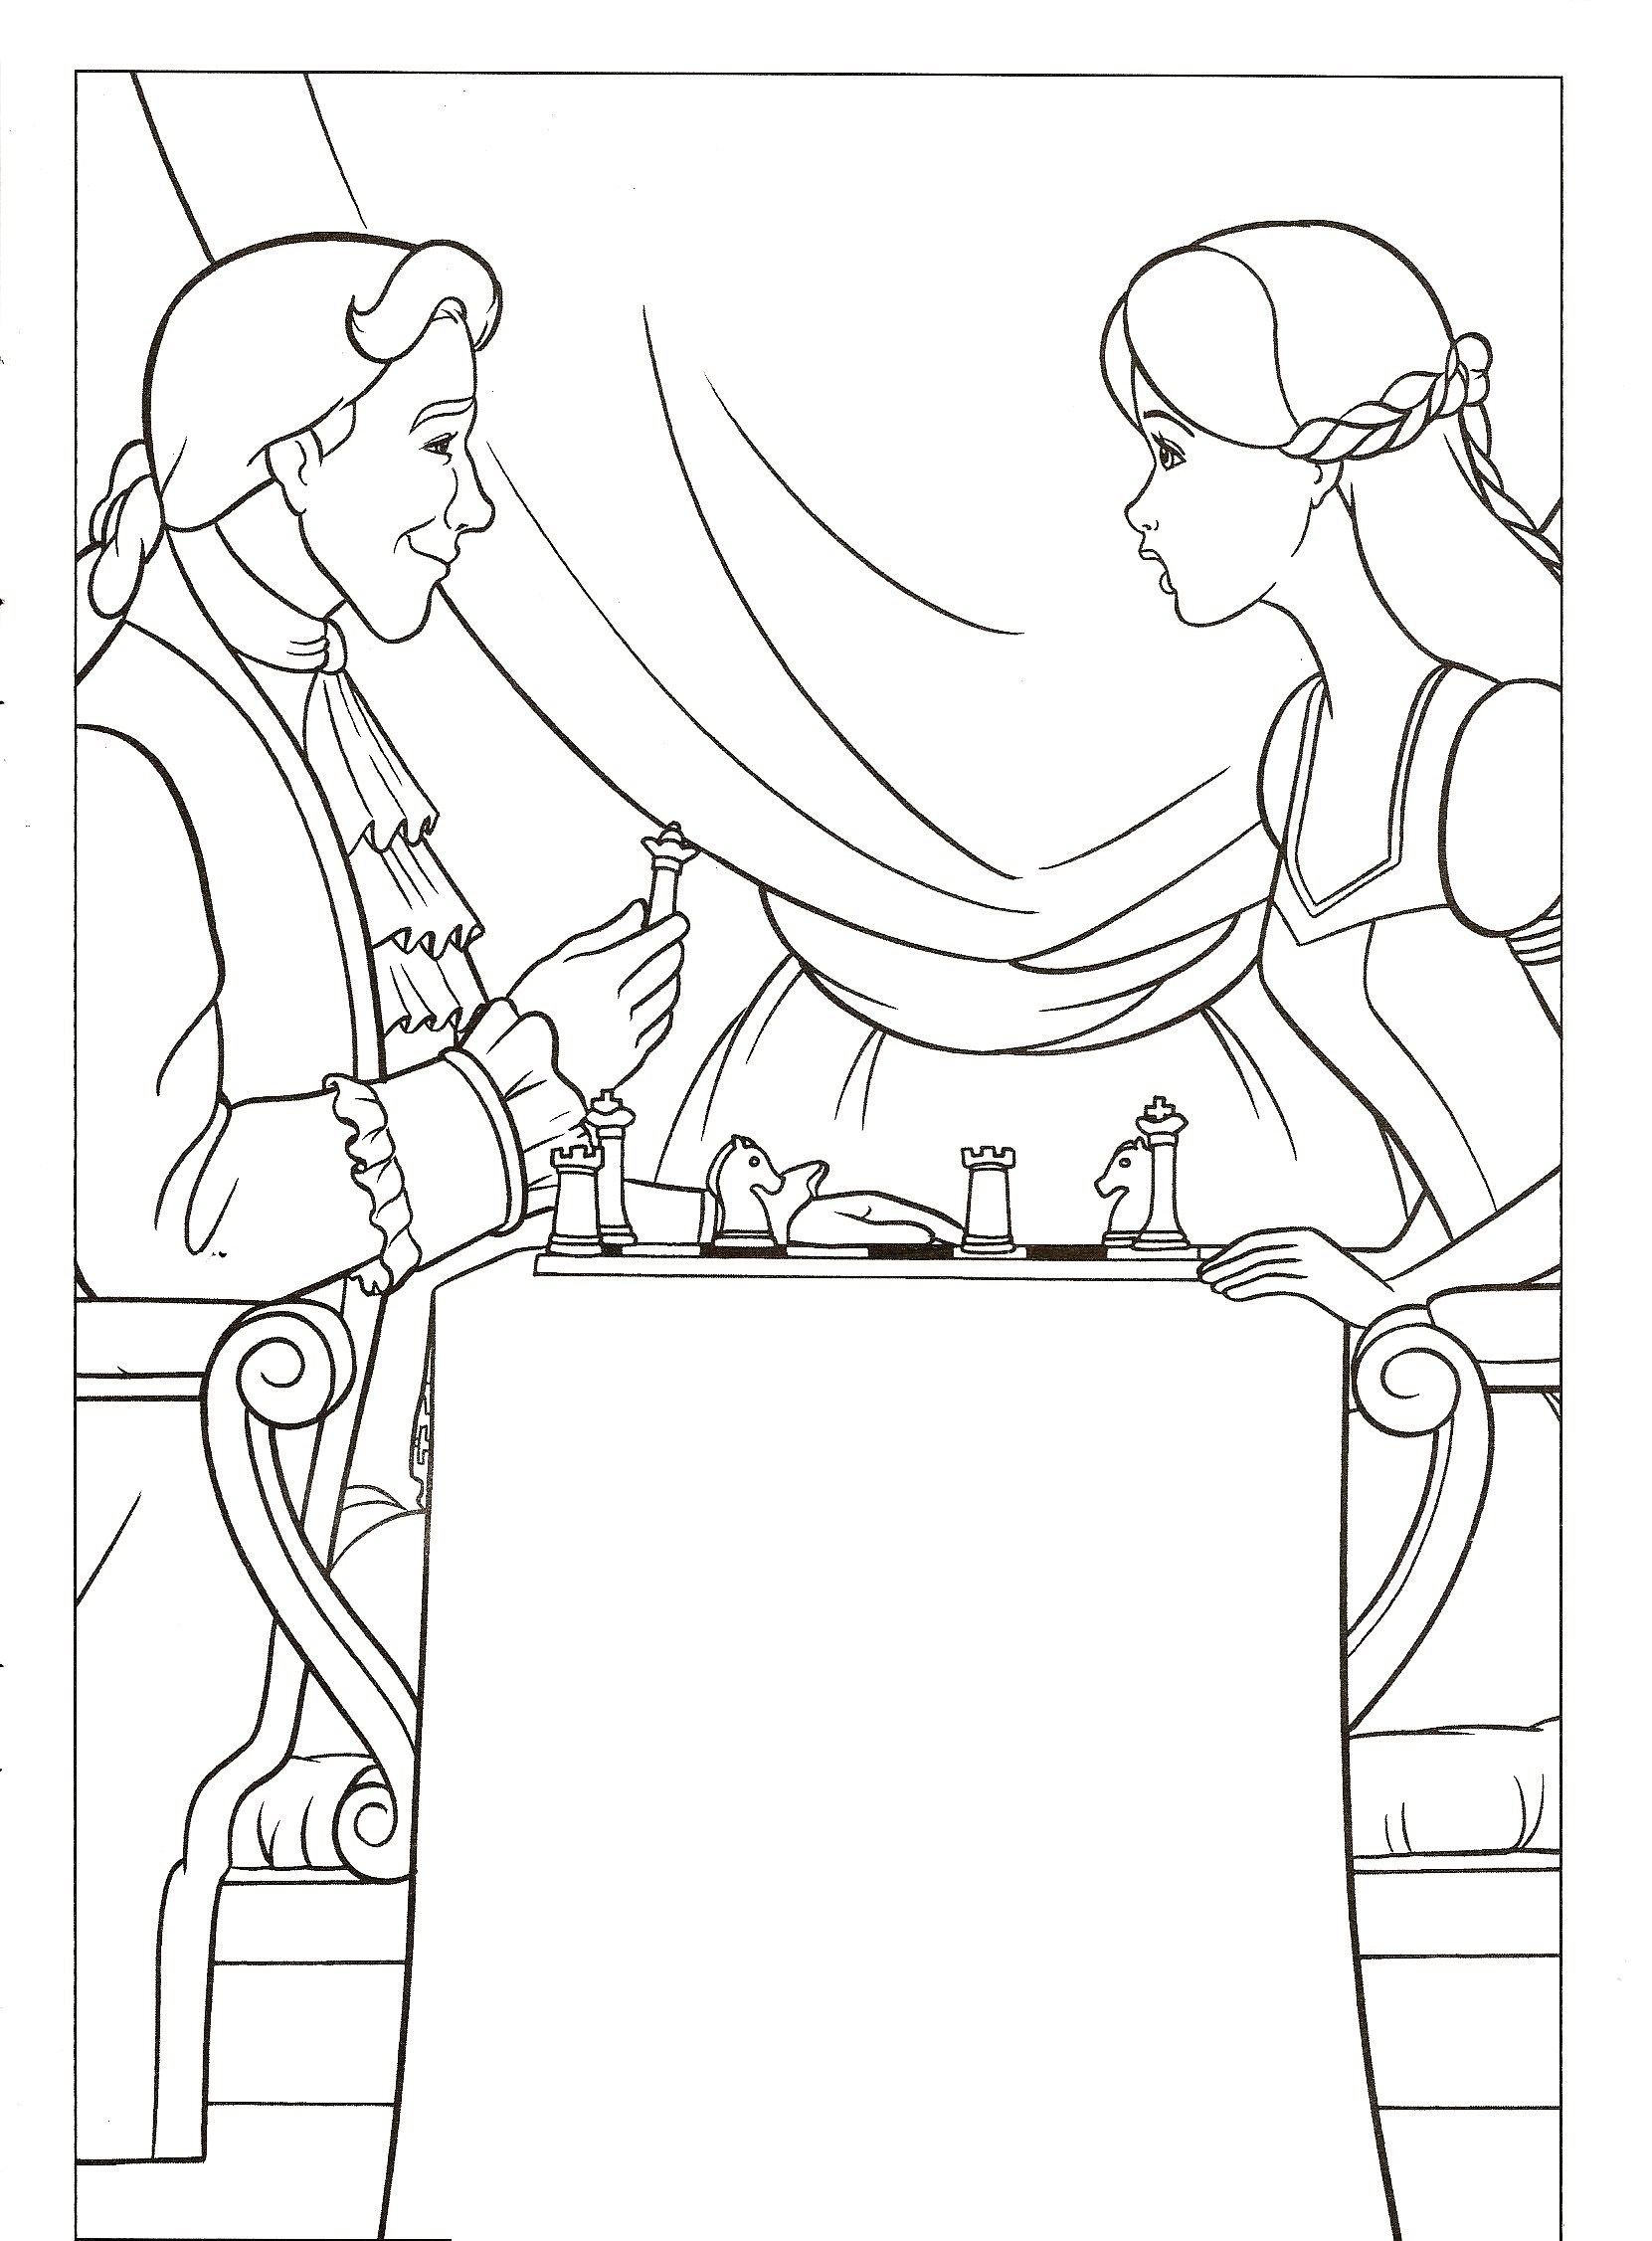 Barbie Dream House Coloring Pages at GetColorings.com  Free printable